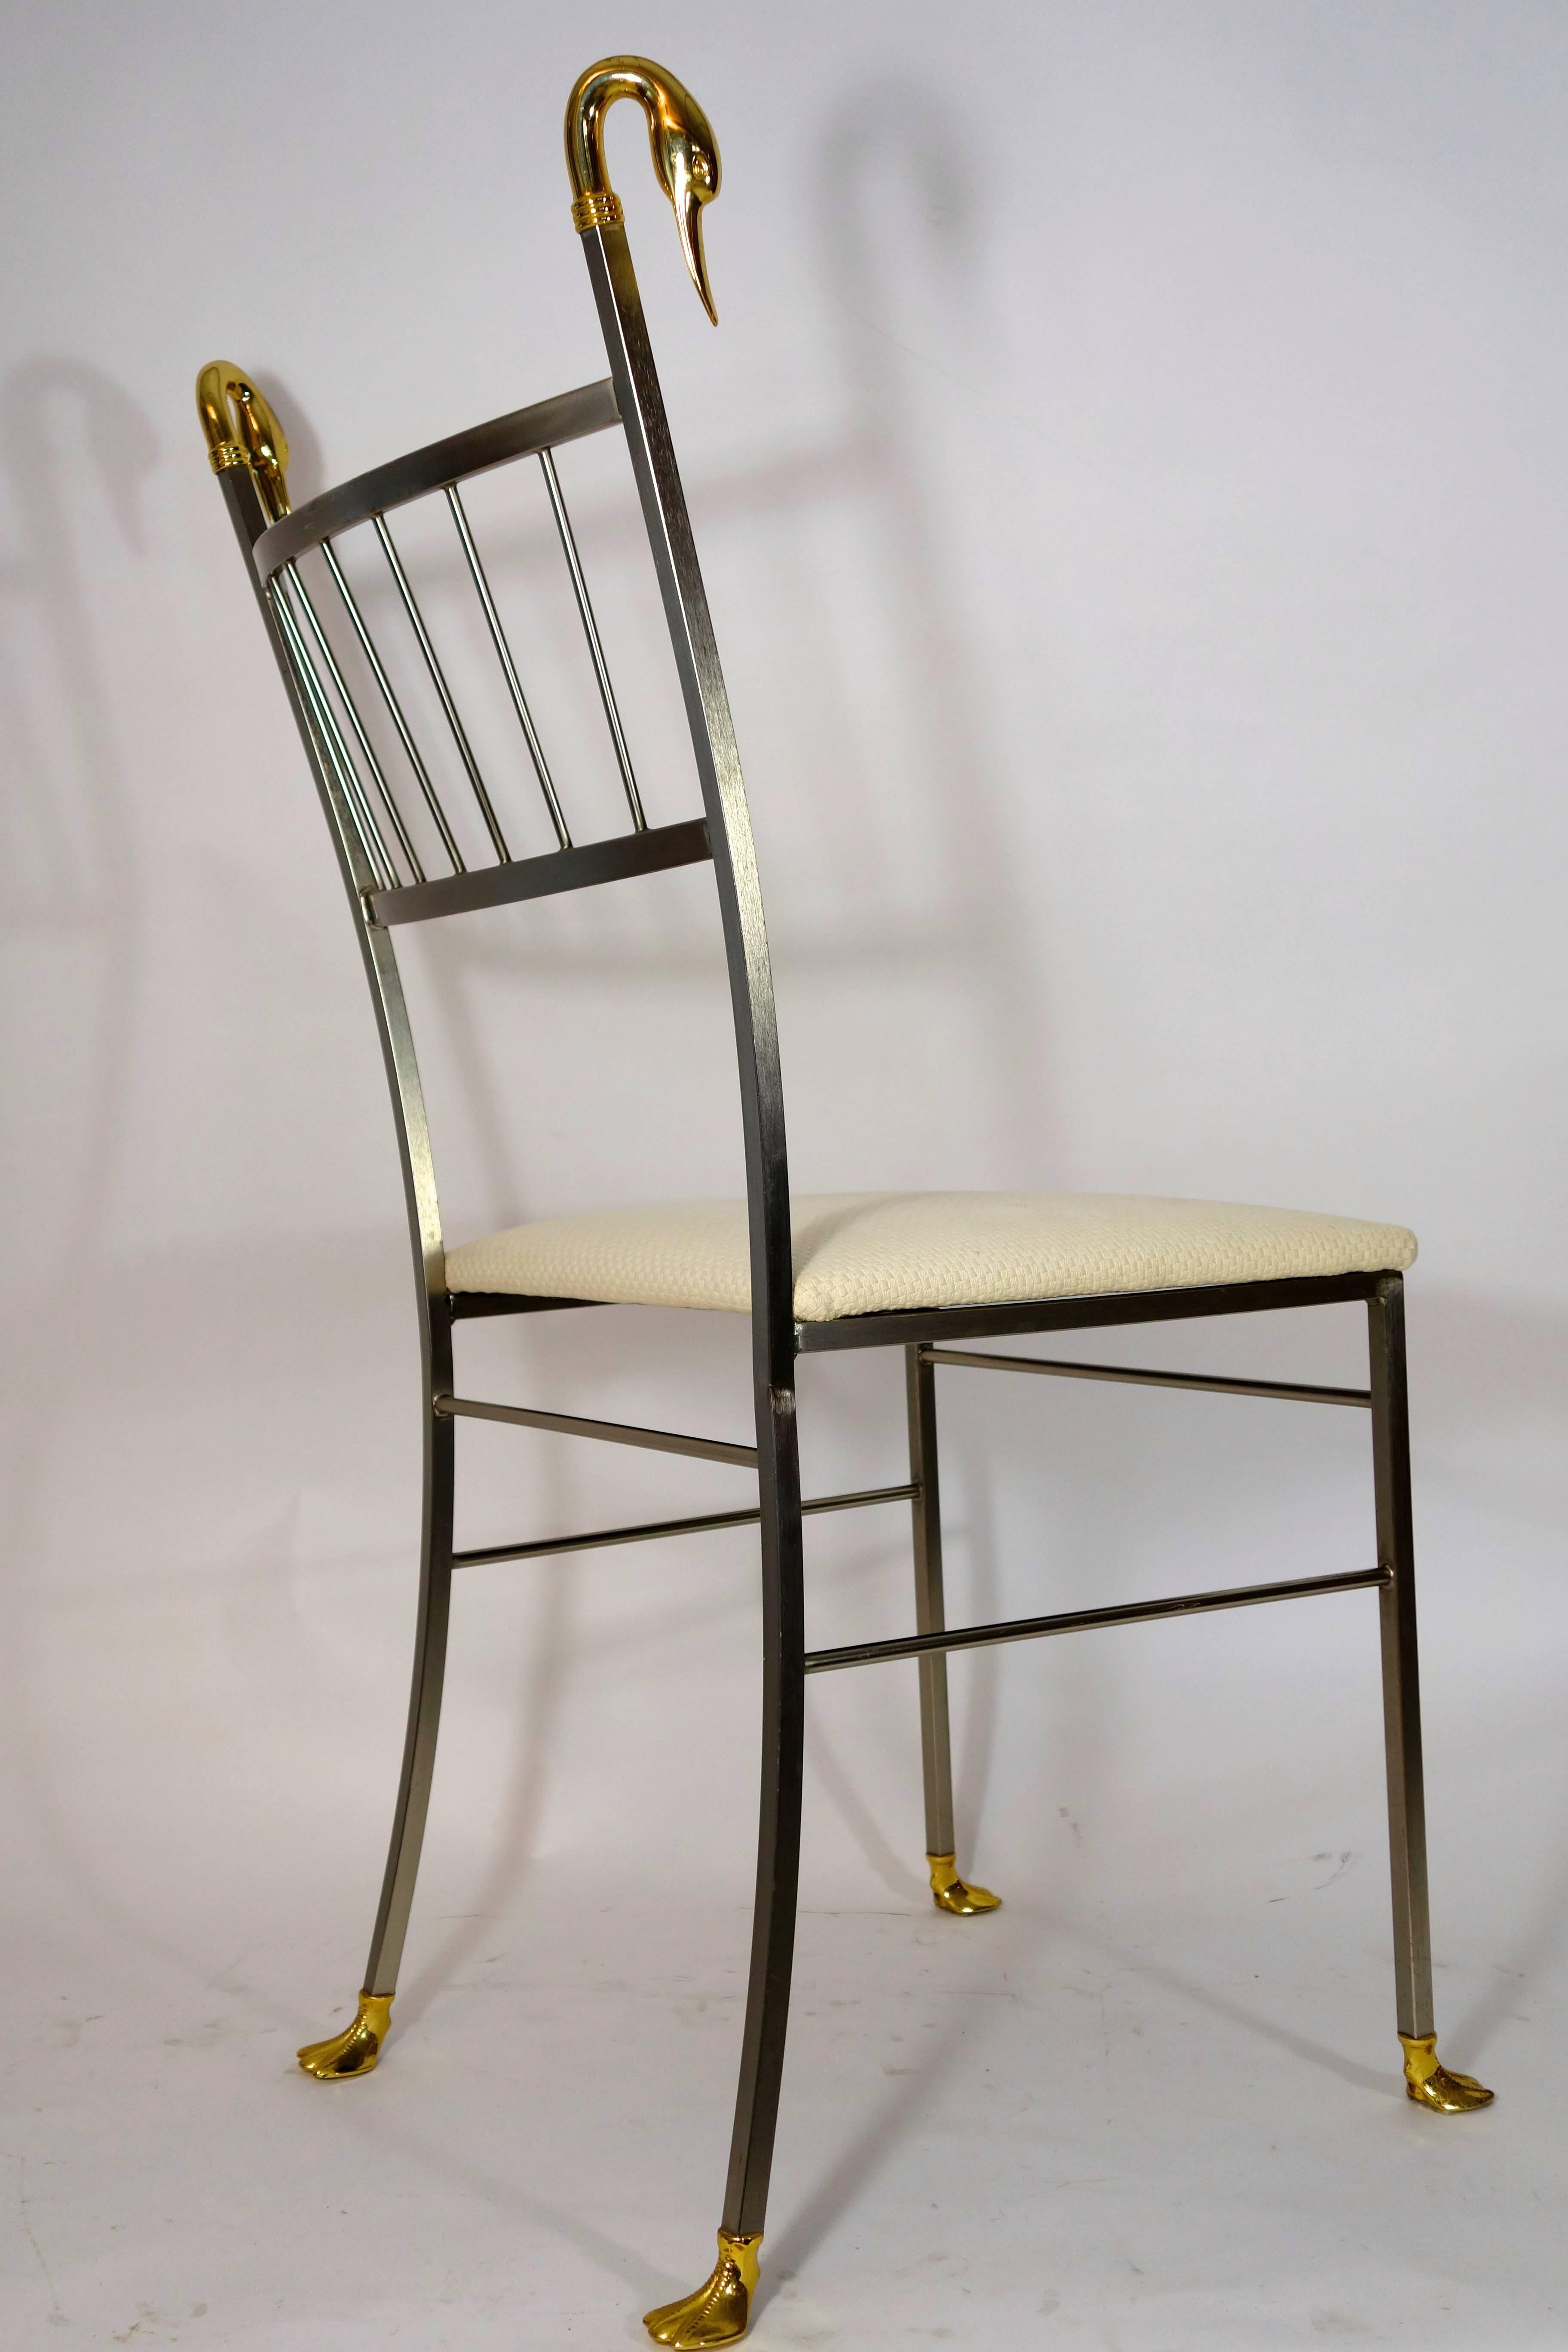 Set of four brass dining chairs in Hollywood Regency style. They have swan ornaments in the shape of swan heads on the top and swan feet on the bottom.
In a very good condition, but off-white upholstery has some stains. We leave it up to your own